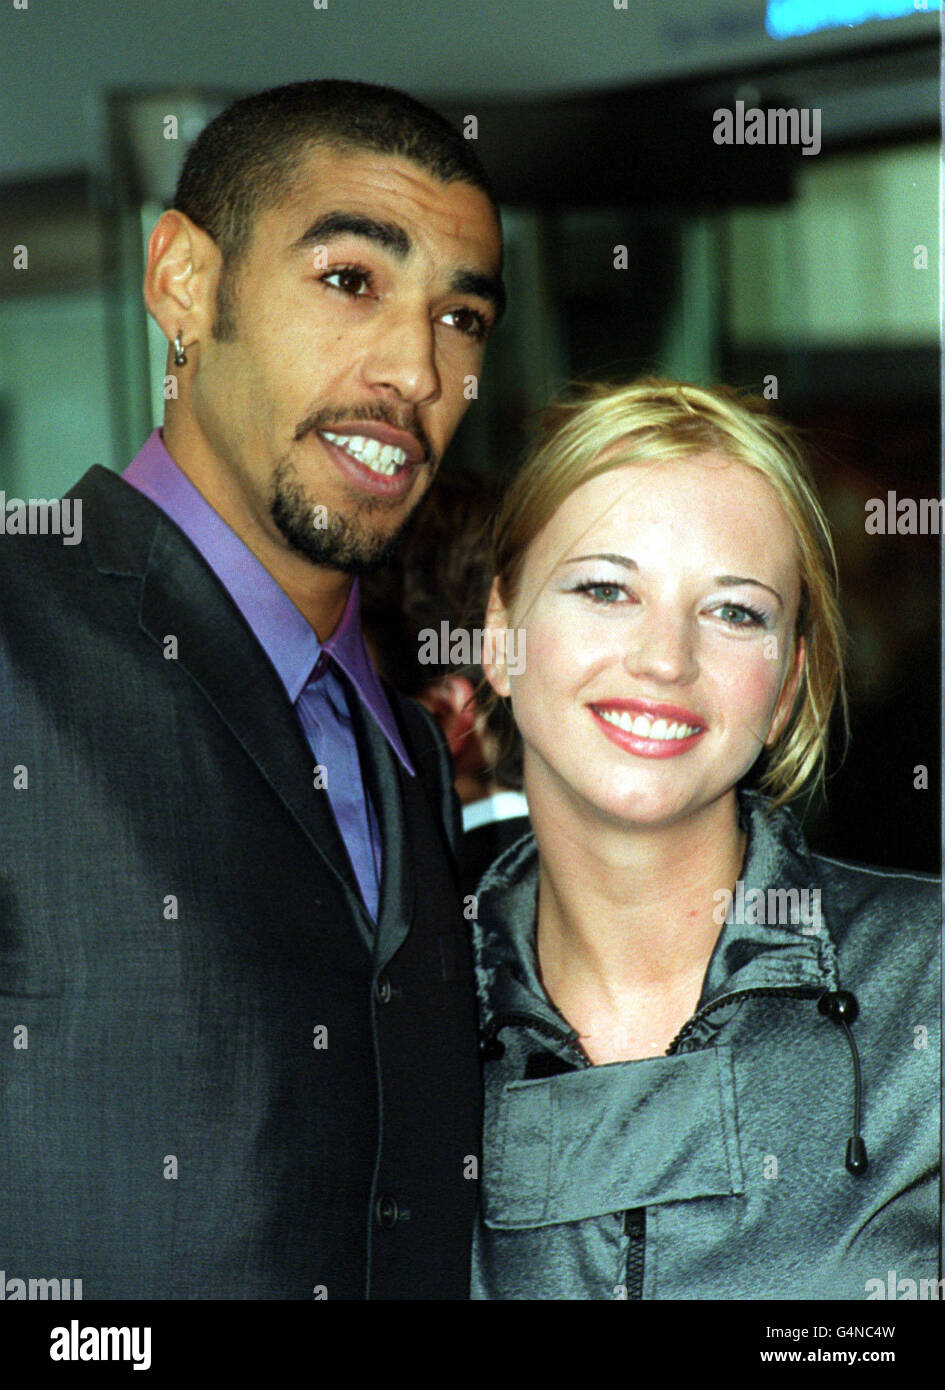 Television presenter and radio DJ Sara Cox and Leeroy Thornhill, from the dance band the Prodigy, arrive for the Royal Premiere of Star Wars: Episode 1, The Phantom Menace at Leicester Square, London. Stock Photo